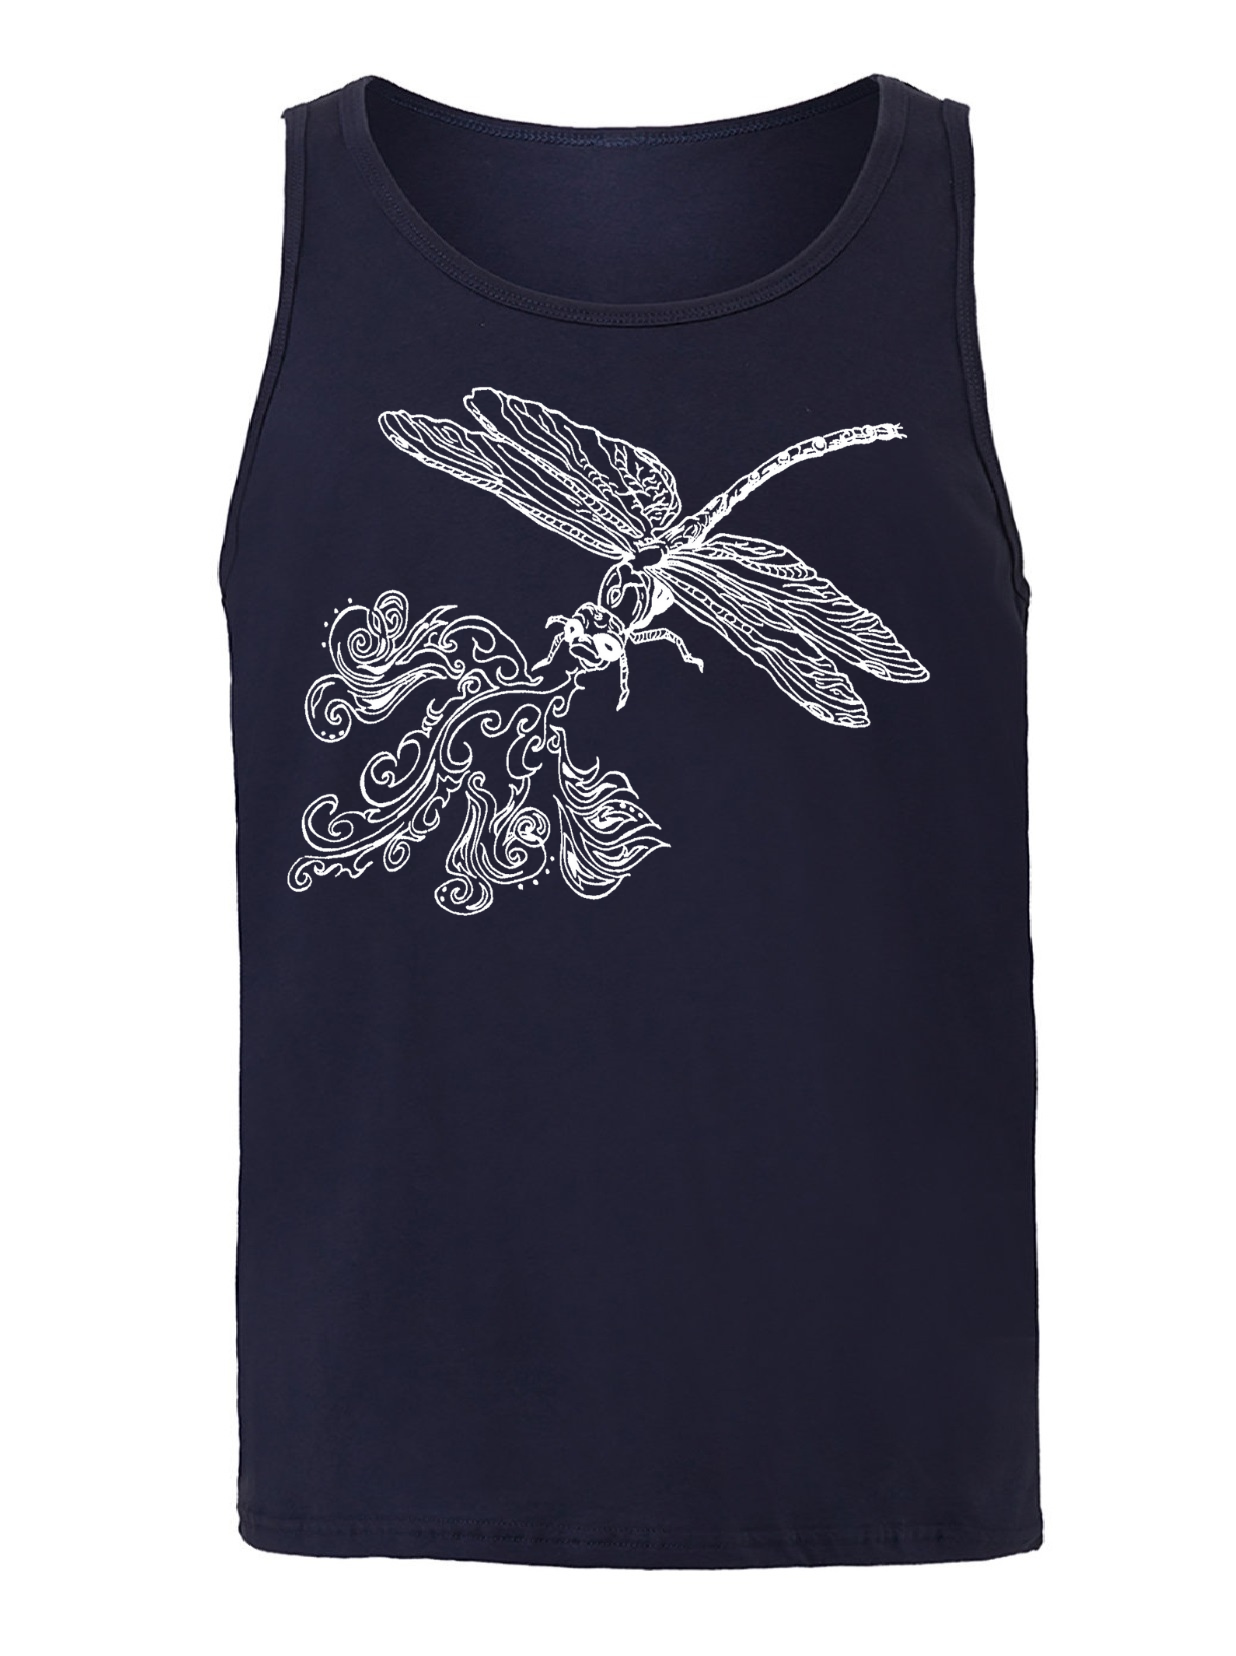 Fire Breathing Dragonfly Unisex Tank Top